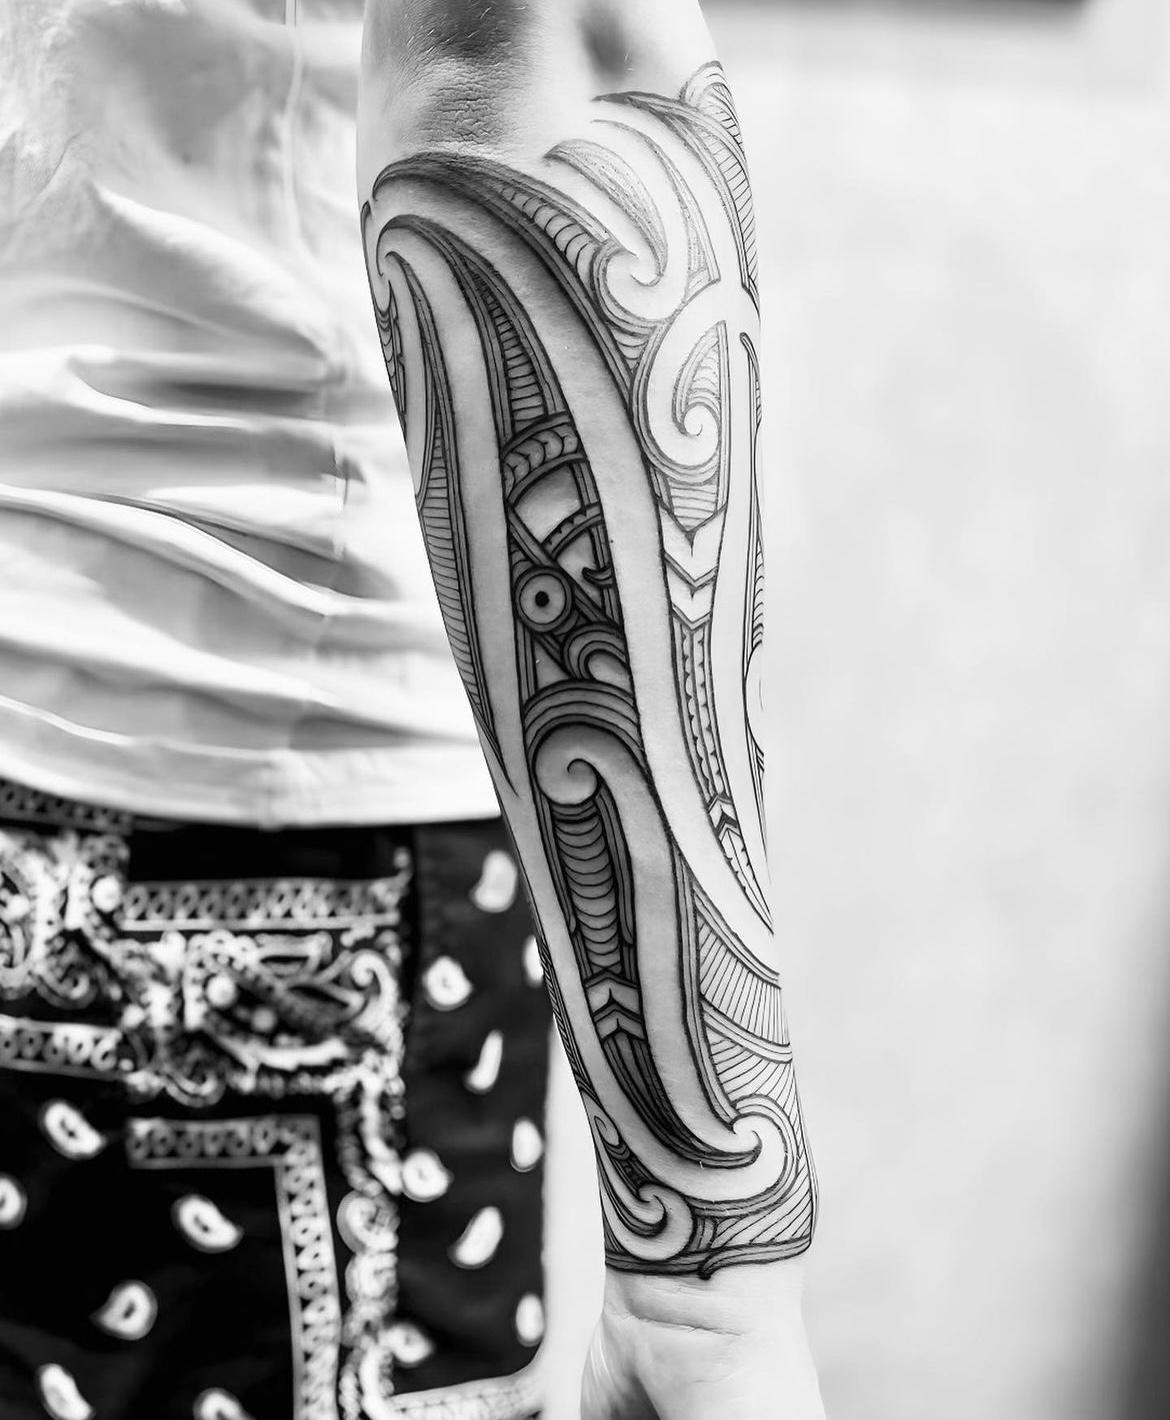 Dreamhands Tattoo - 🎨Artist：Daniel Fantastic designs for traditional  tattoos. Blending different elements just to design a unique tattoo! Make a  appointment with Daniel at www.dhtattoo.co.nz #tattoo #tattoos #tattooist  #tattoostyle #tattooing ...